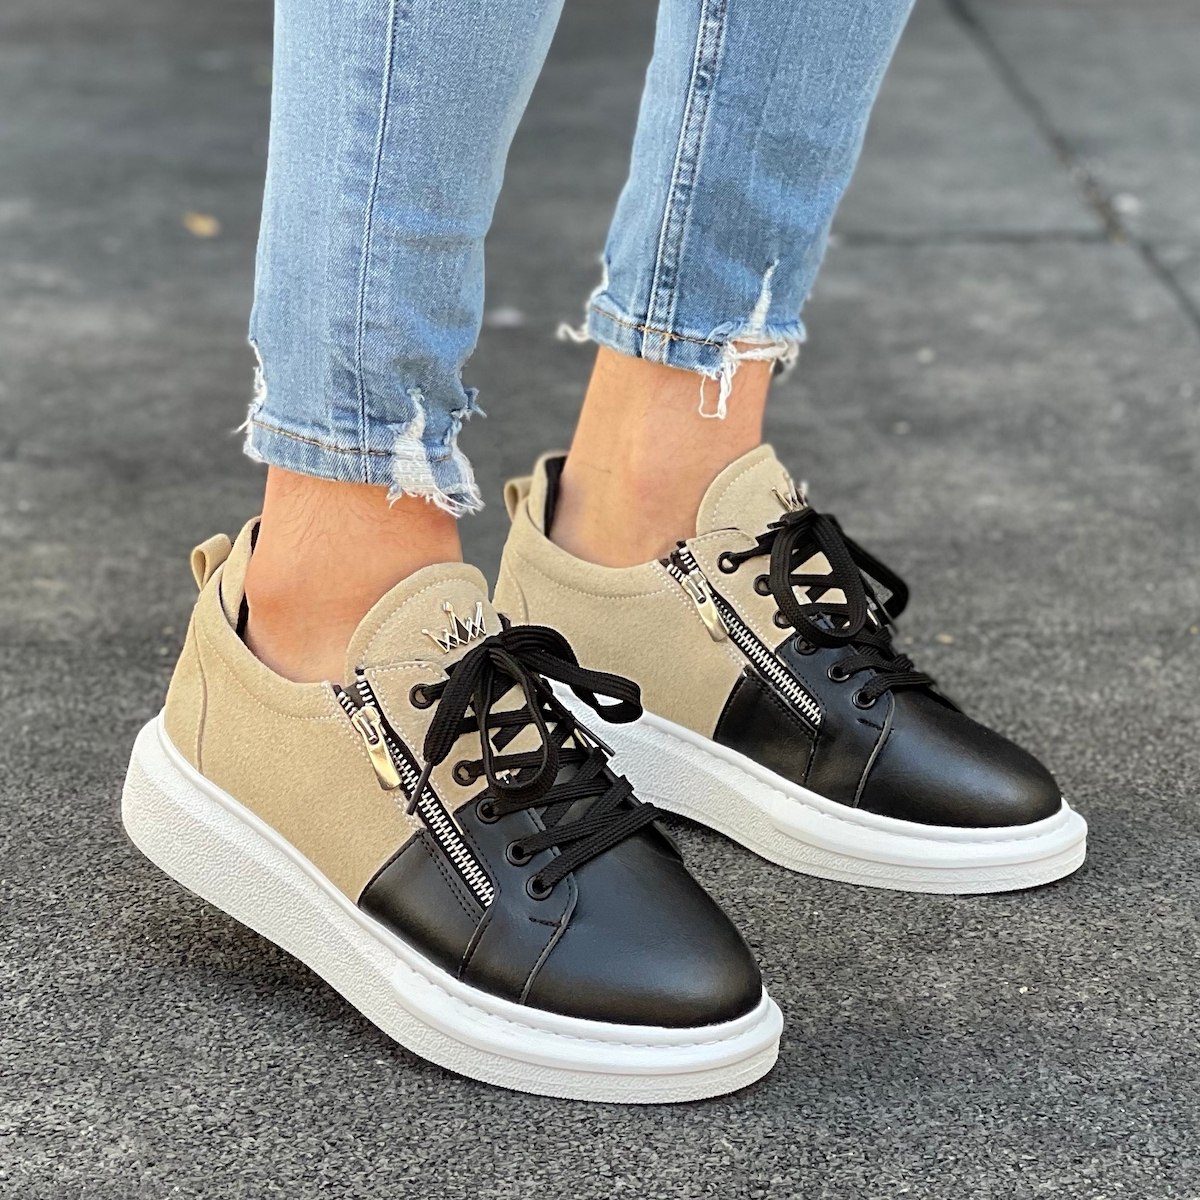 Hype Sole Zipped Style Sneakers in Cream-Black - 5